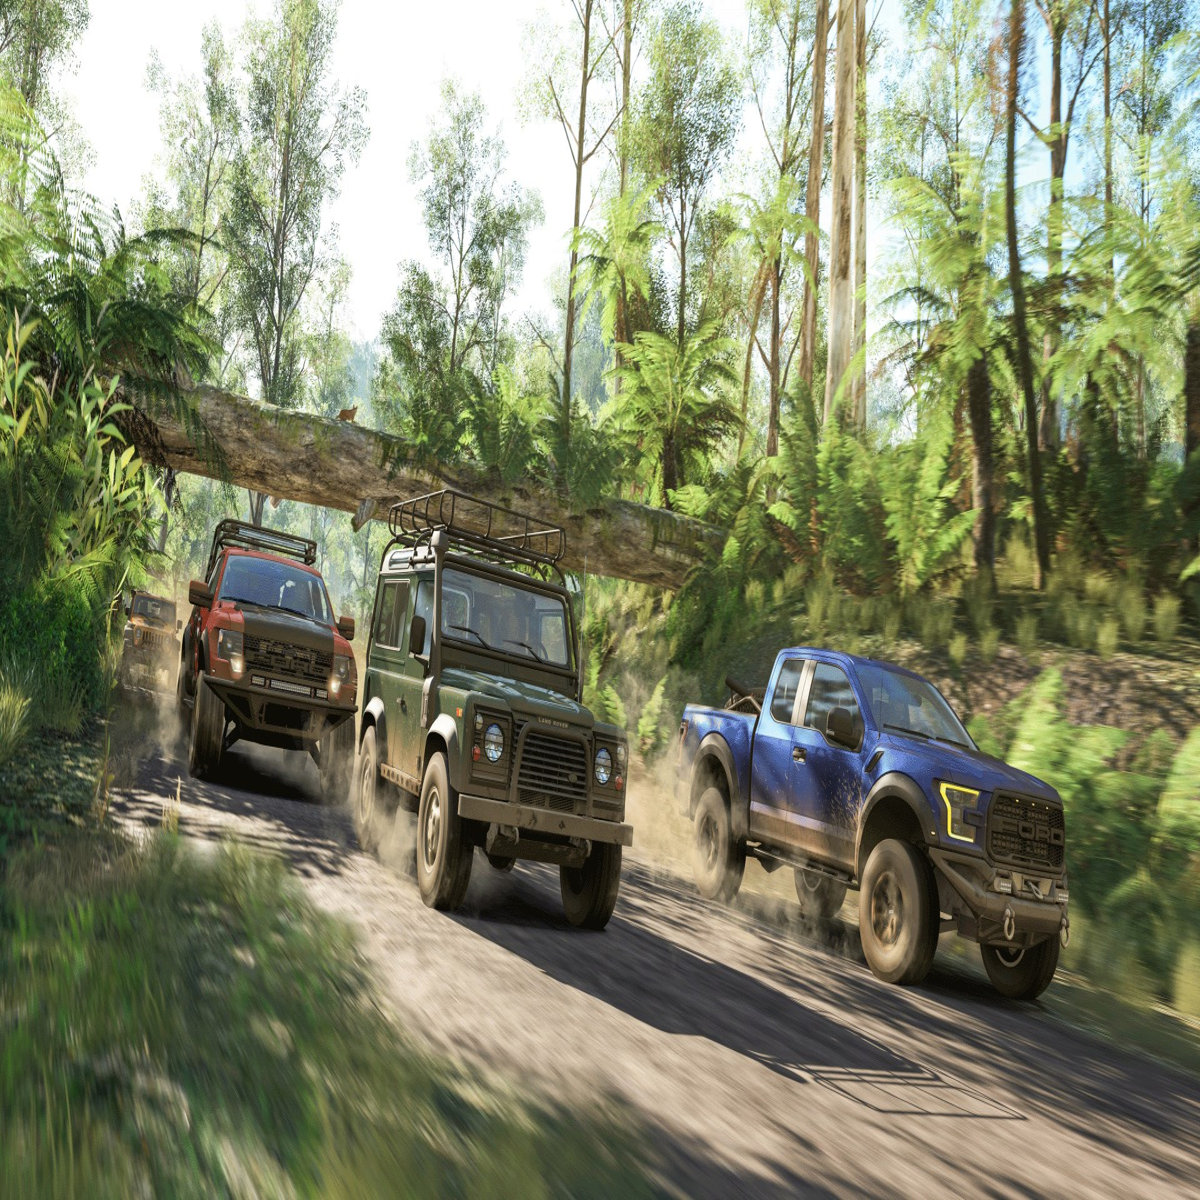 Microsoft released the wrong version of 'Forza Horizon 3' for PC